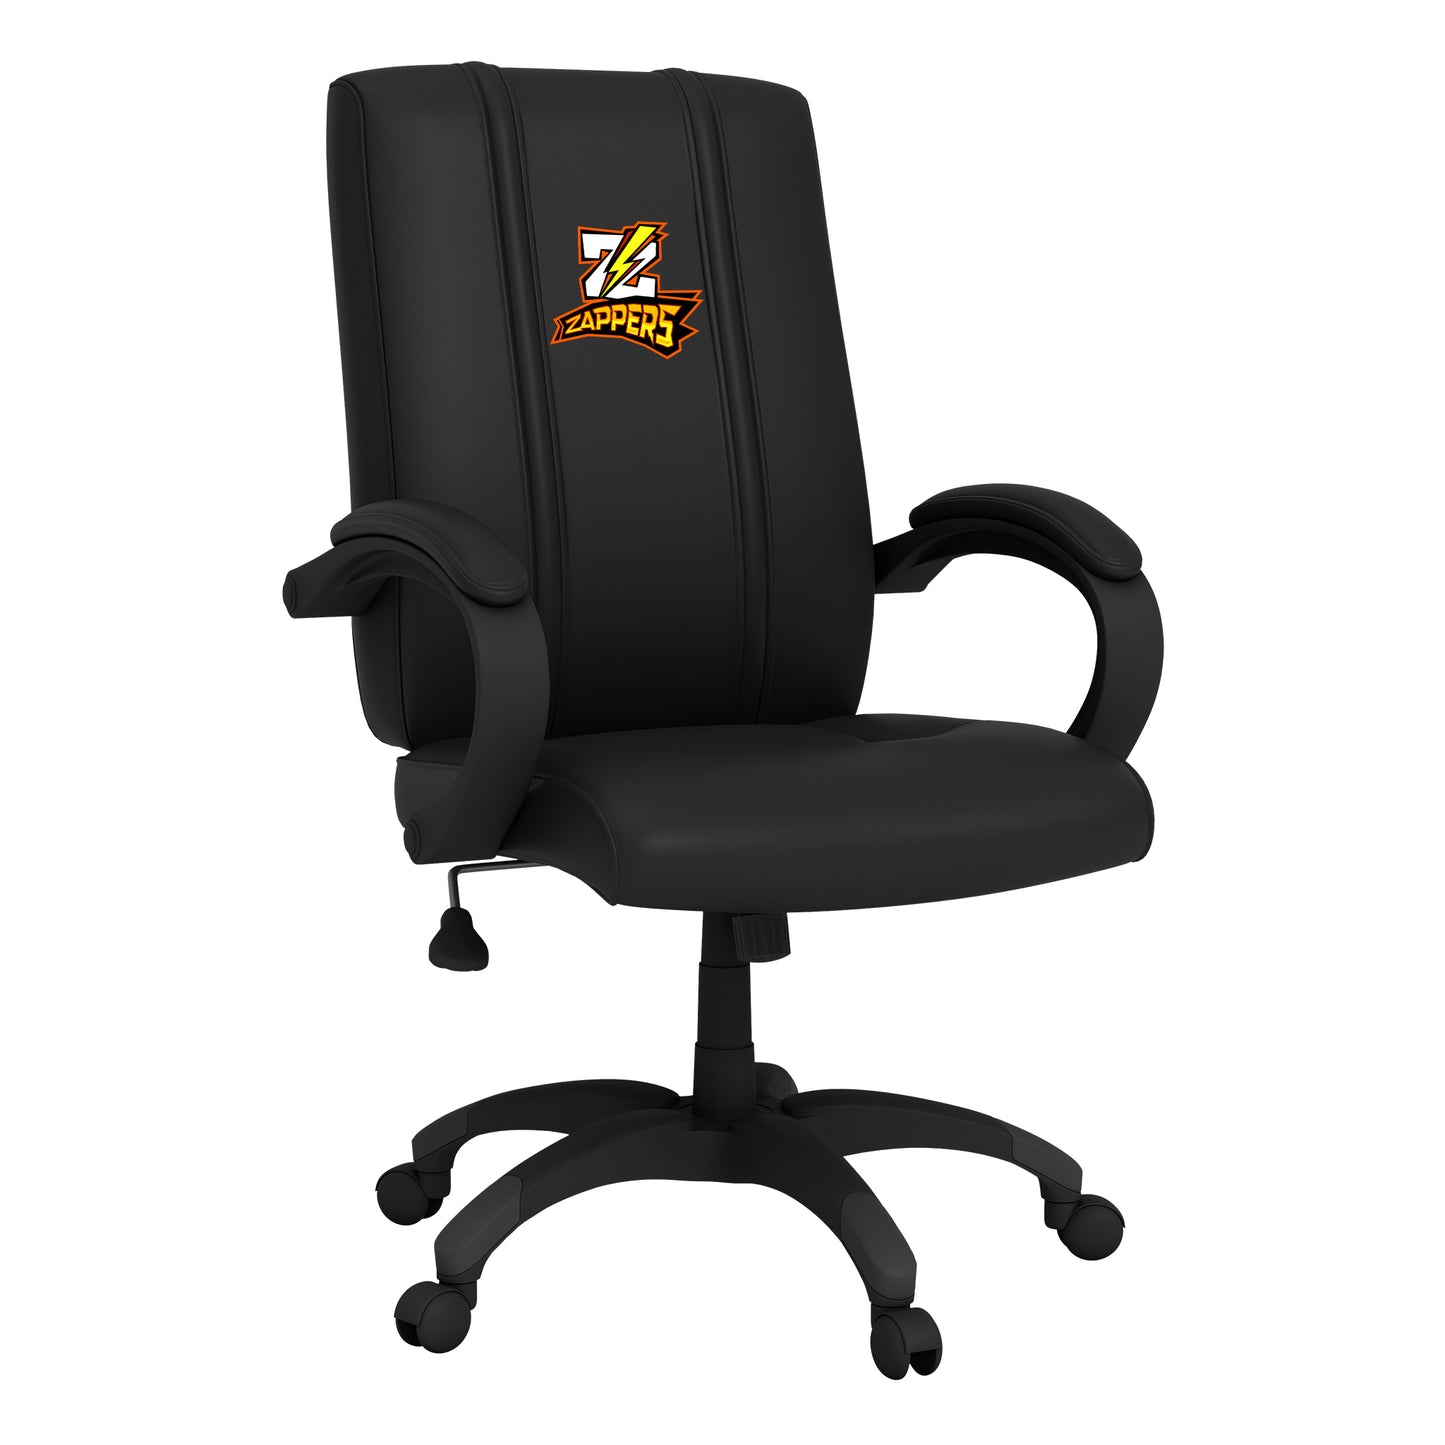 Office Chair 1000 with Zappers Logo